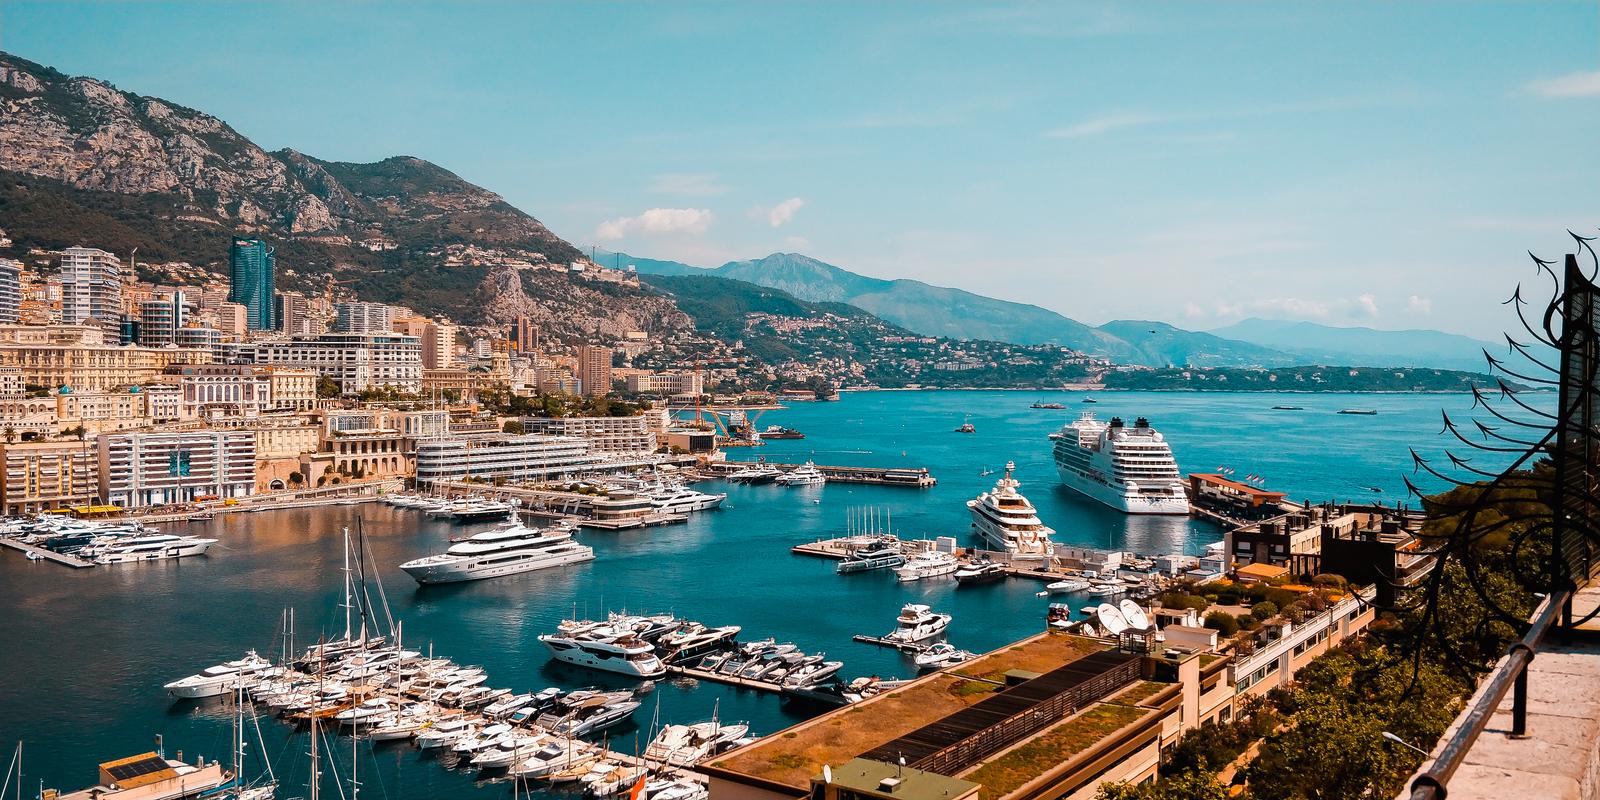 If You Can Score More Than 18 on This Famous Landmarks Quiz, You Probably Know All About the World Monaco